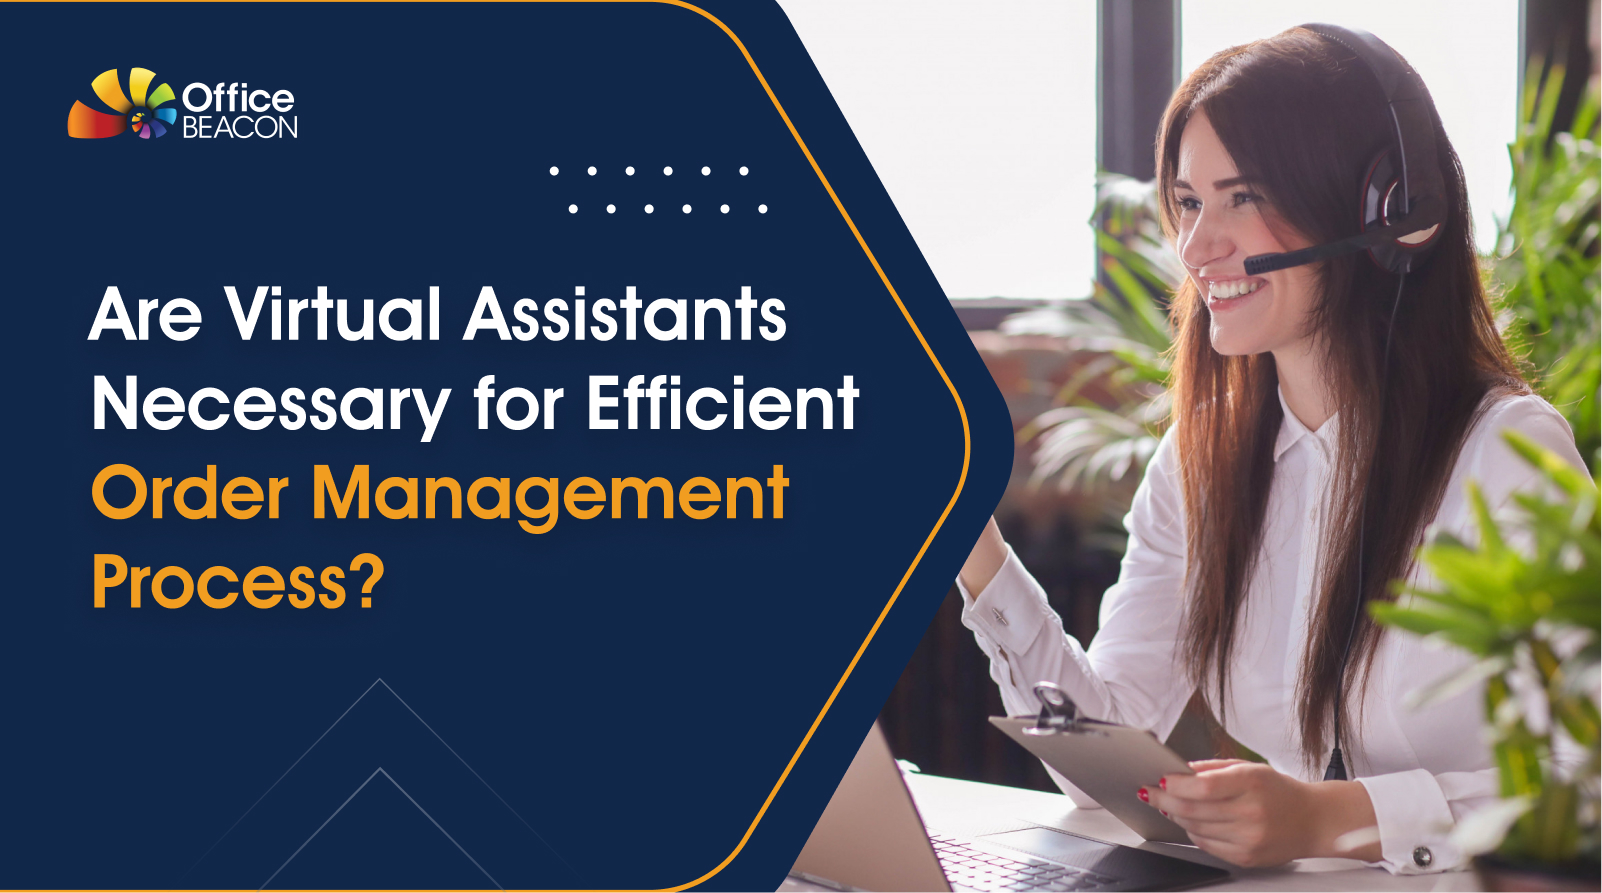 Are Virtual Assistants Necessary for Efficient Order Management Process?